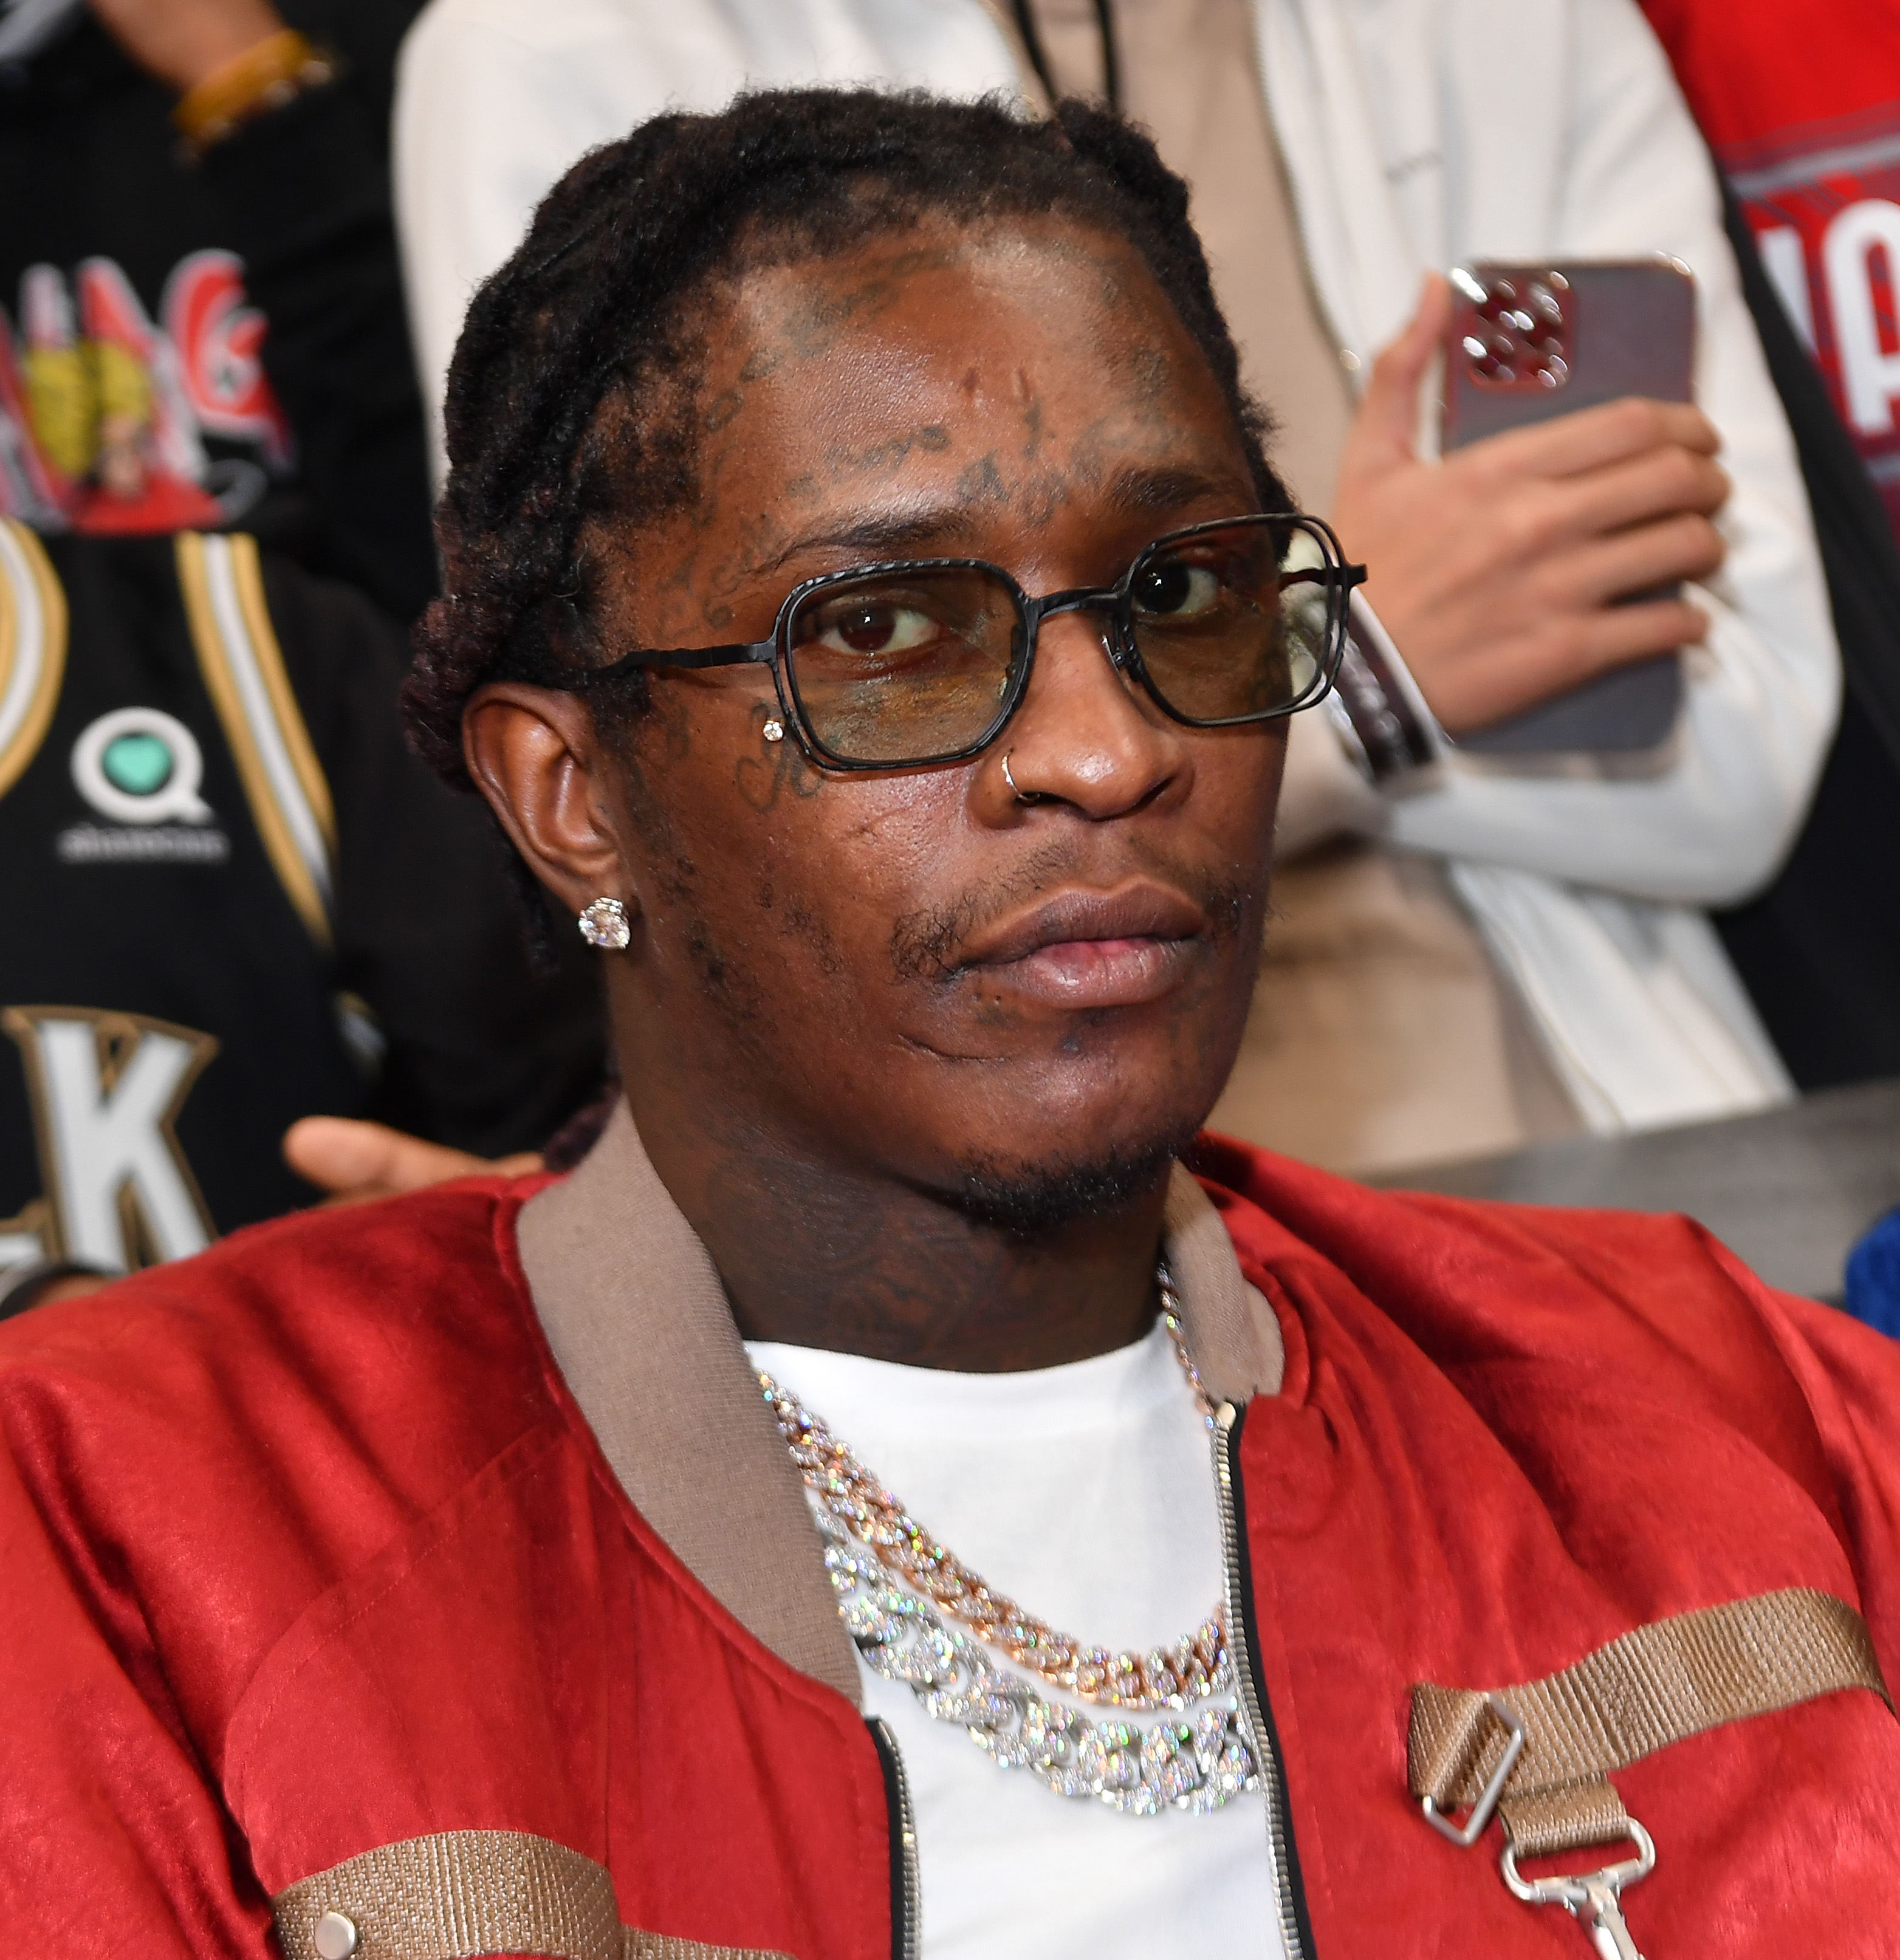 Young Thug attends the game between the Phoenix Suns and the Atlanta Hawks at State Farm Arena on February 3, 2022, in Atlanta, Georgia. | Source: Getty Images